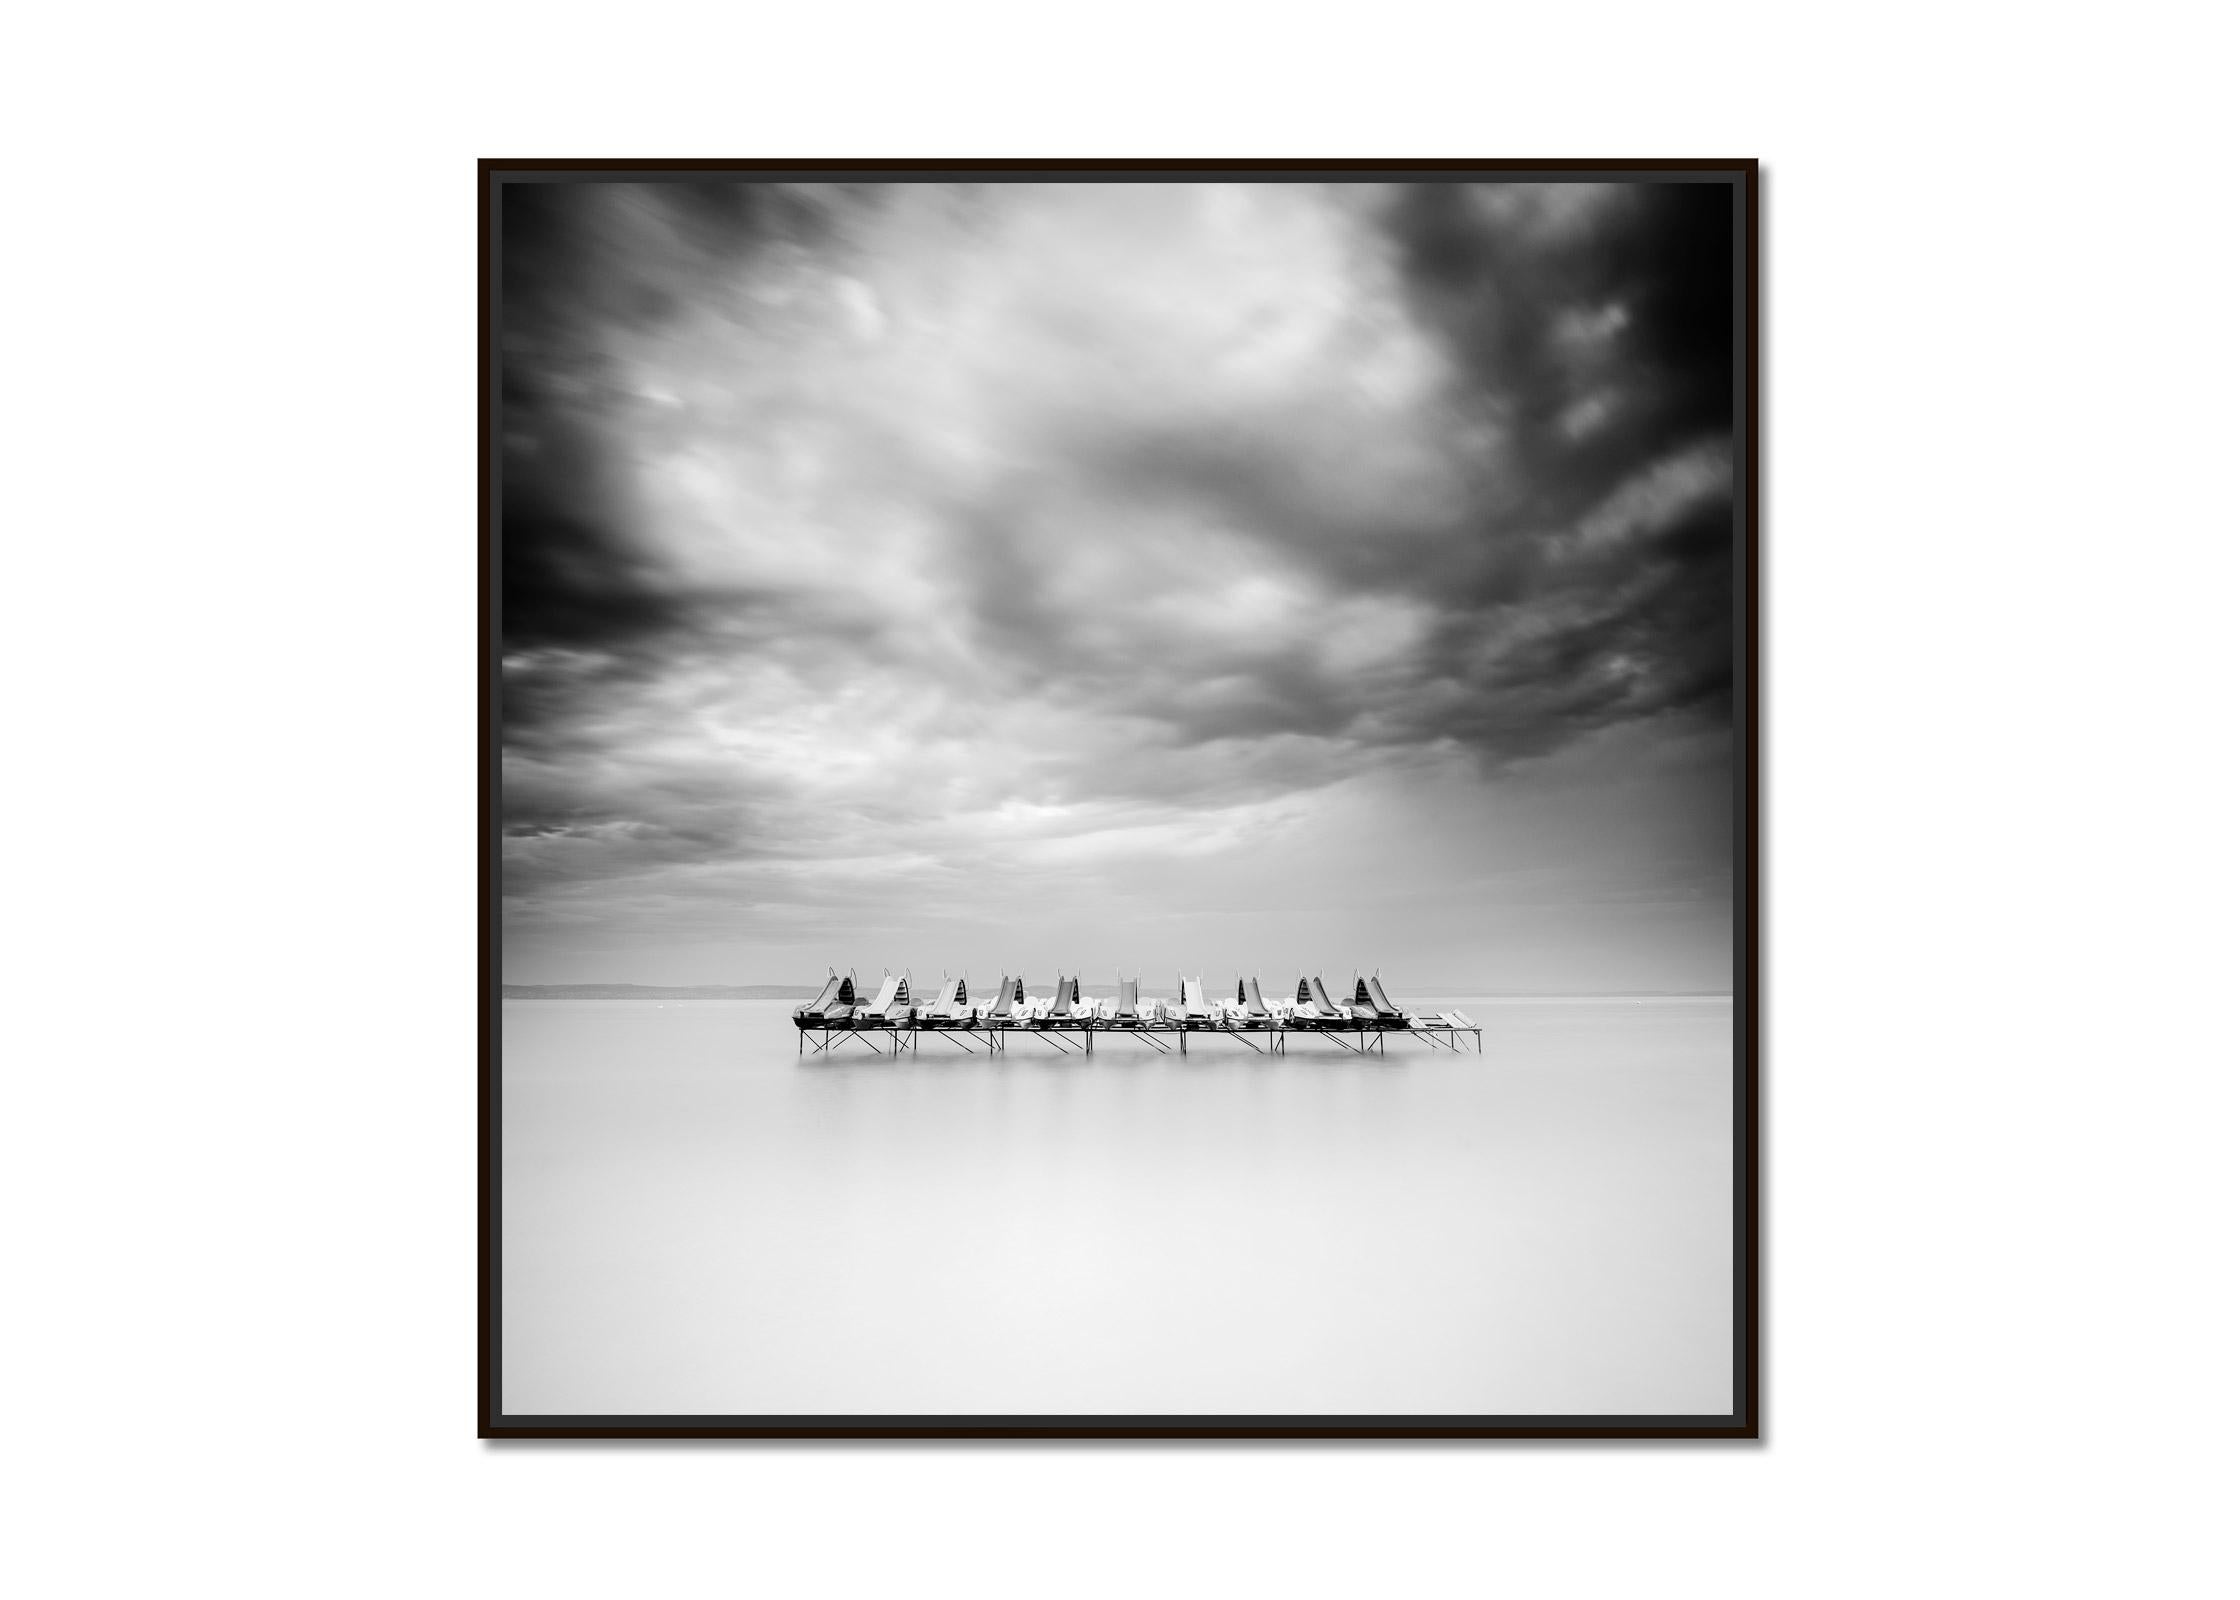 Pedal Boat, black and white, long exposure, fine art seascape photography print - Photograph by Gerald Berghammer